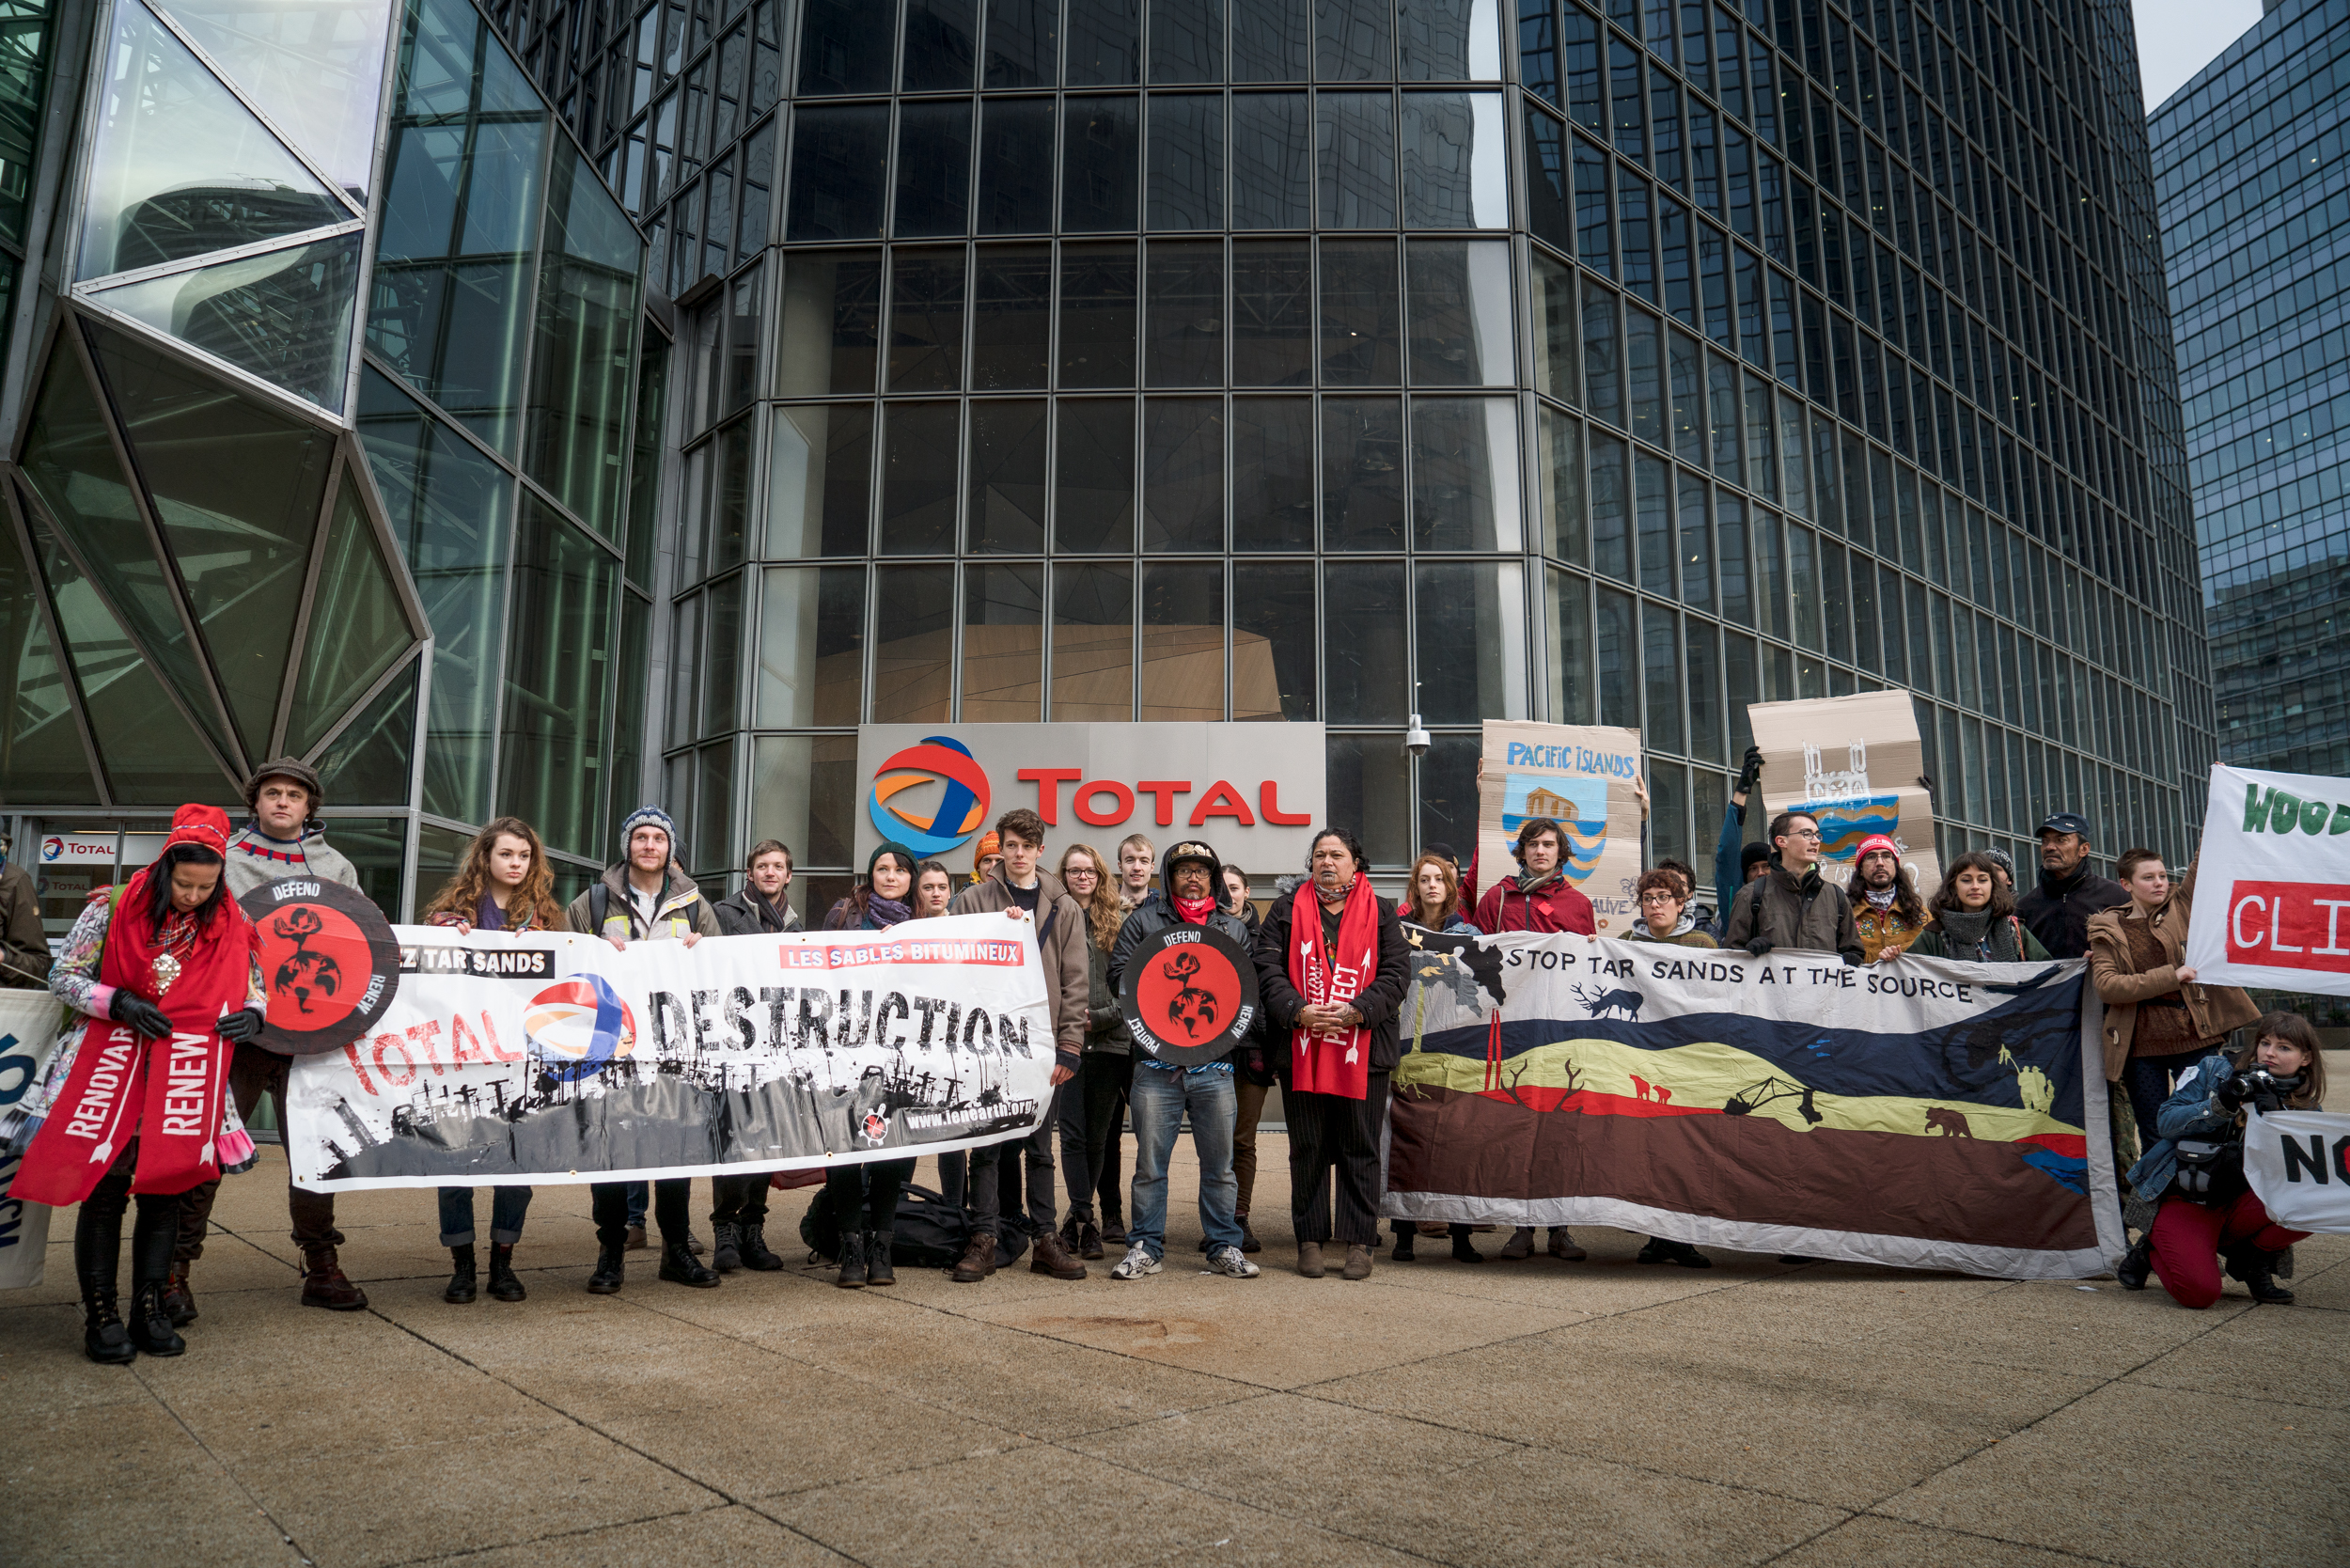 You are currently viewing Indigenous Communities and European Allies take action on Total in Paris during Climate Talks